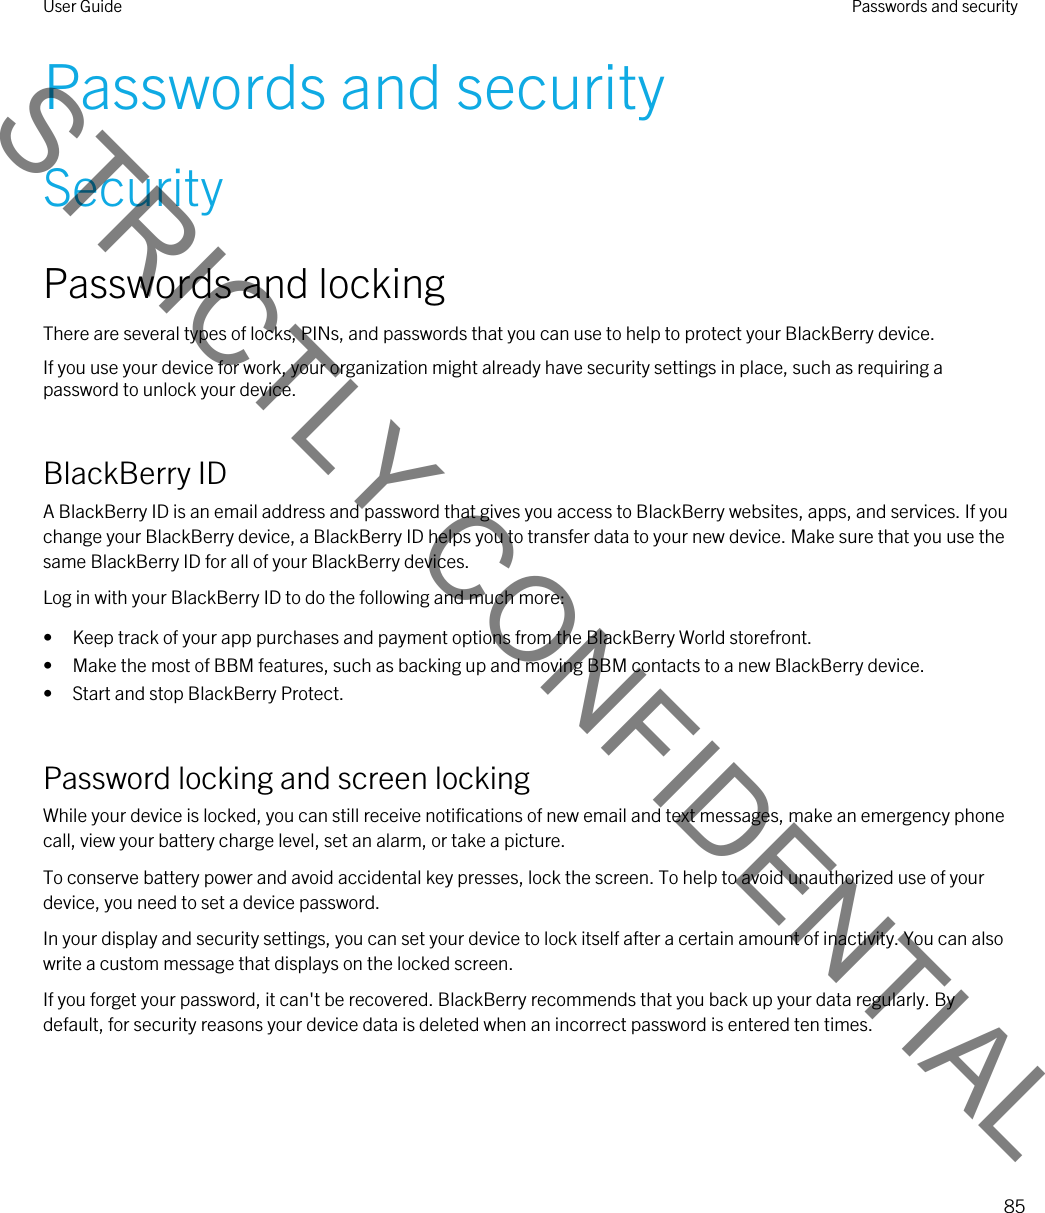 Passwords and securitySecurityPasswords and lockingThere are several types of locks, PINs, and passwords that you can use to help to protect your BlackBerry device.If you use your device for work, your organization might already have security settings in place, such as requiring a password to unlock your device.BlackBerry IDA BlackBerry ID is an email address and password that gives you access to BlackBerry websites, apps, and services. If you change your BlackBerry device, a BlackBerry ID helps you to transfer data to your new device. Make sure that you use the same BlackBerry ID for all of your BlackBerry devices.Log in with your BlackBerry ID to do the following and much more:• Keep track of your app purchases and payment options from the BlackBerry World storefront.• Make the most of BBM features, such as backing up and moving BBM contacts to a new BlackBerry device.• Start and stop BlackBerry Protect.Password locking and screen lockingWhile your device is locked, you can still receive notifications of new email and text messages, make an emergency phone call, view your battery charge level, set an alarm, or take a picture.To conserve battery power and avoid accidental key presses, lock the screen. To help to avoid unauthorized use of your device, you need to set a device password.In your display and security settings, you can set your device to lock itself after a certain amount of inactivity. You can also write a custom message that displays on the locked screen.If you forget your password, it can&apos;t be recovered. BlackBerry recommends that you back up your data regularly. By default, for security reasons your device data is deleted when an incorrect password is entered ten times.User Guide Passwords and security85STRICTLY CONFIDENTIAL